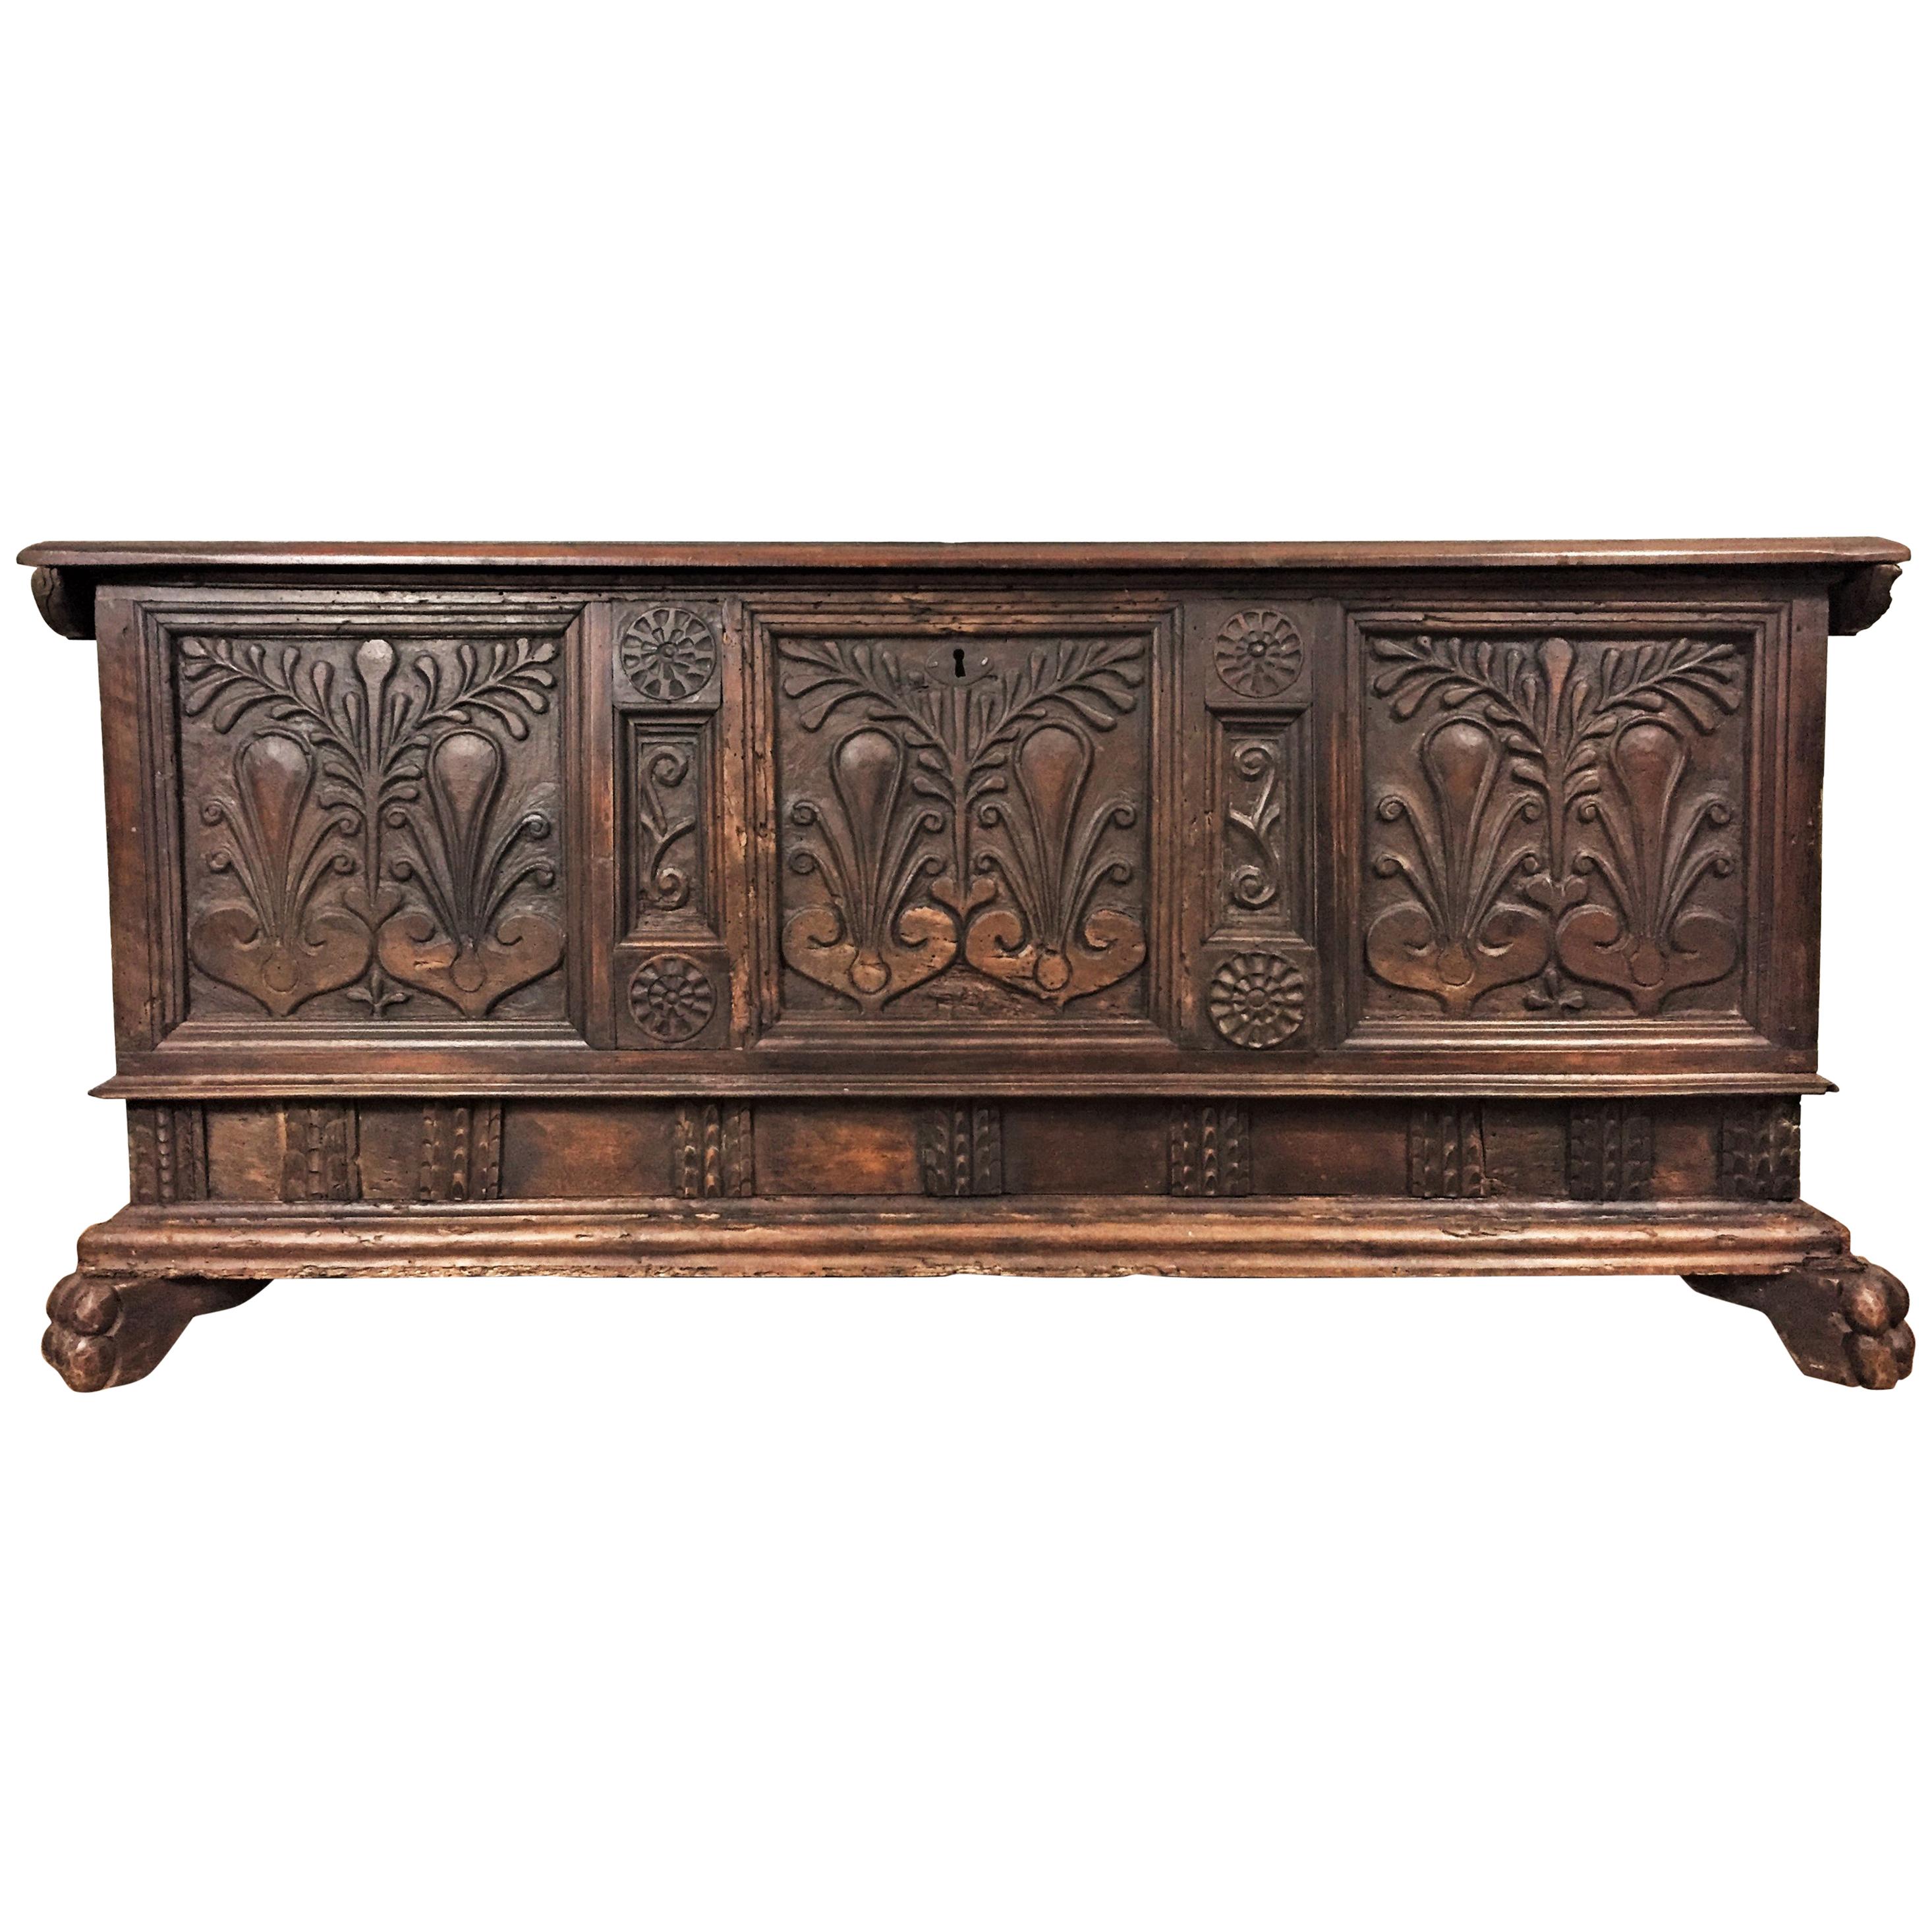 Early 17th Century Renaissance Chest in Walnut with Lion Feet